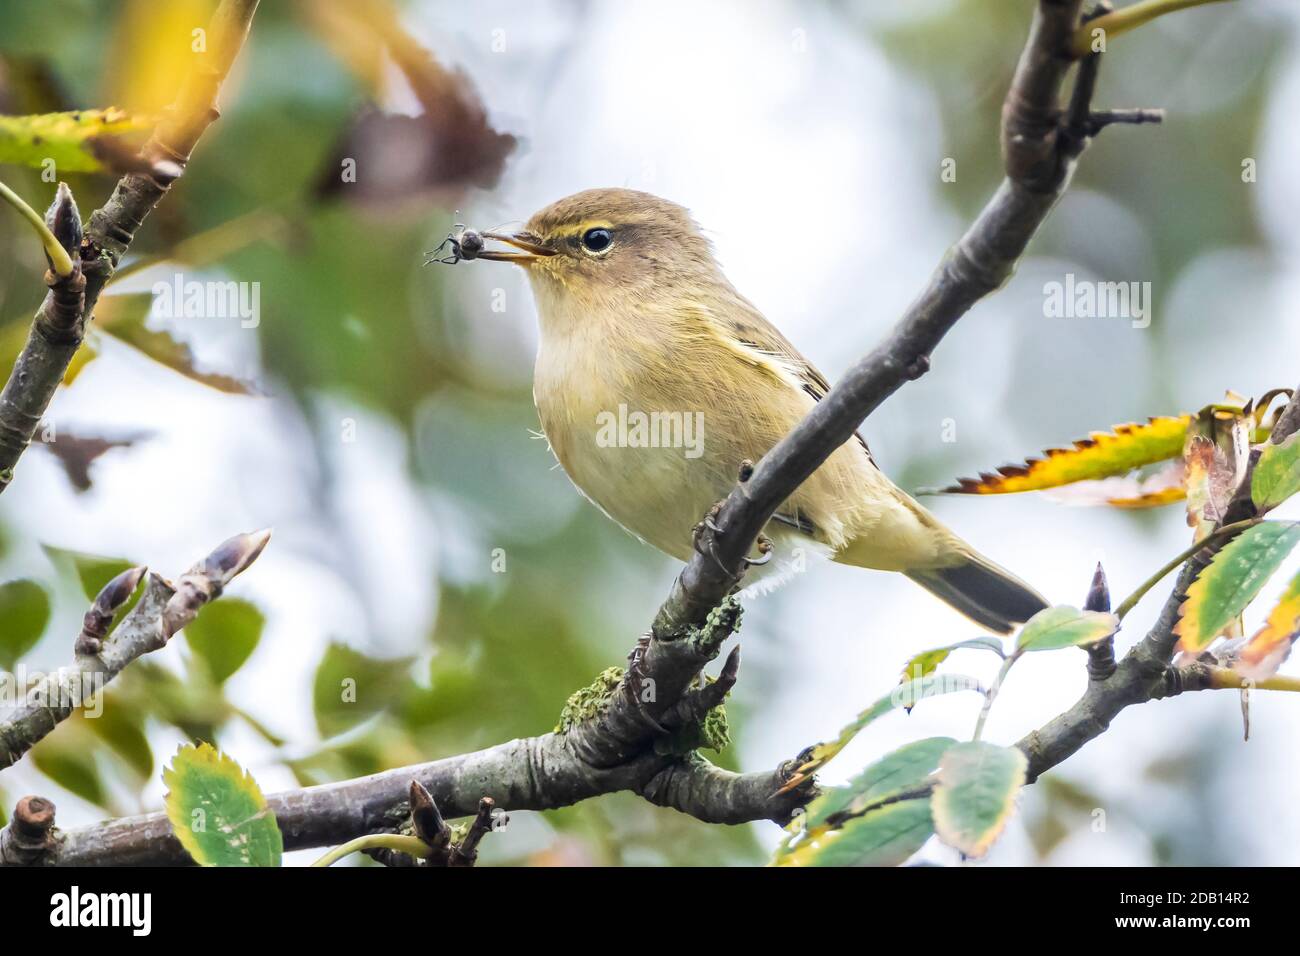 Close-up of a common chiffchaff bird Phylloscopus collybita, caught a insect. Soft backlight on a green vibrant background. Stock Photo